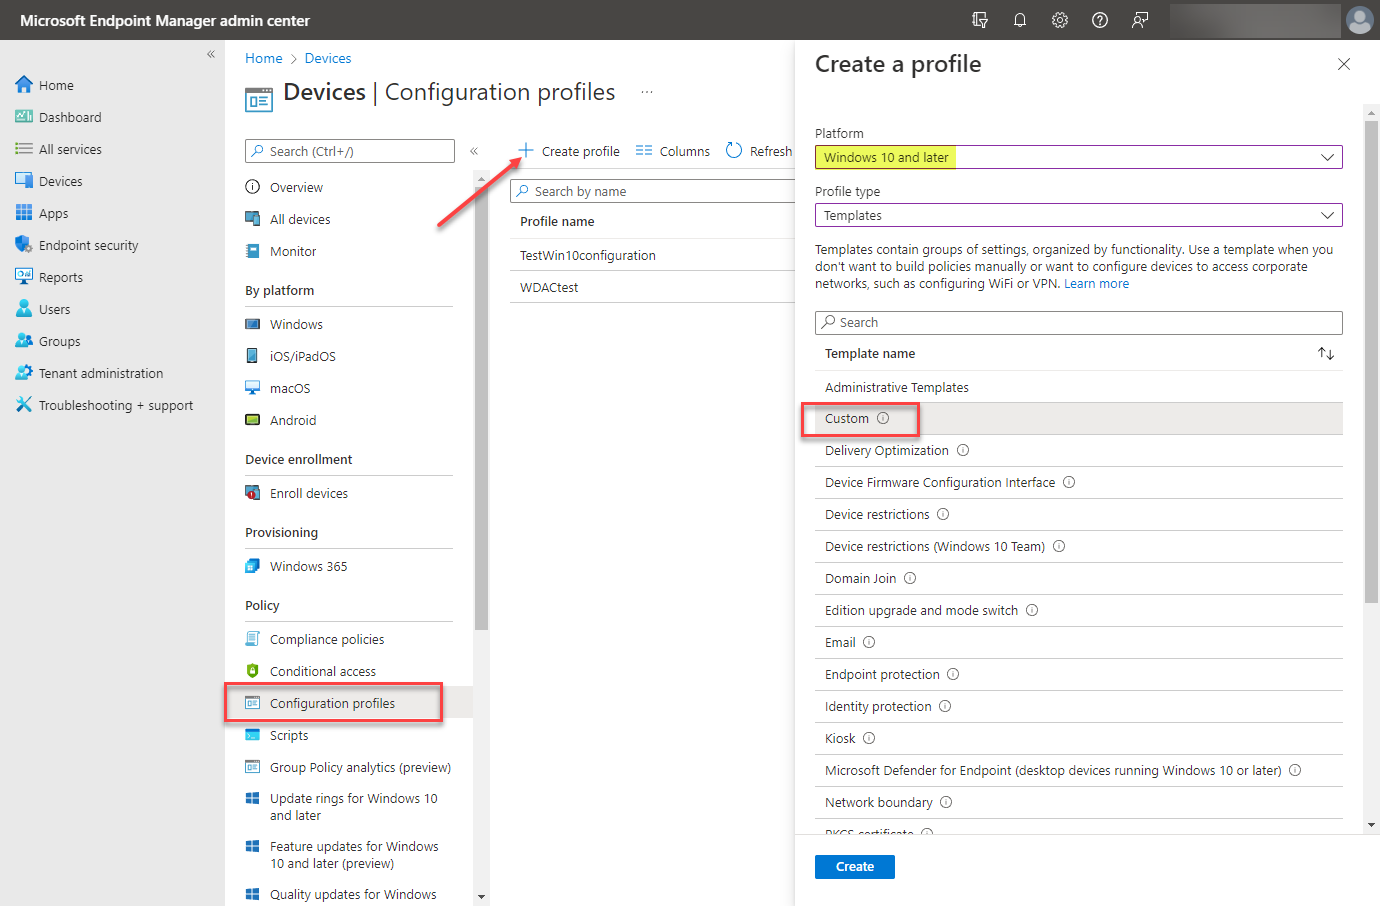 Beginning the process of creating a new configuration profile for secured-core PC configuration lock